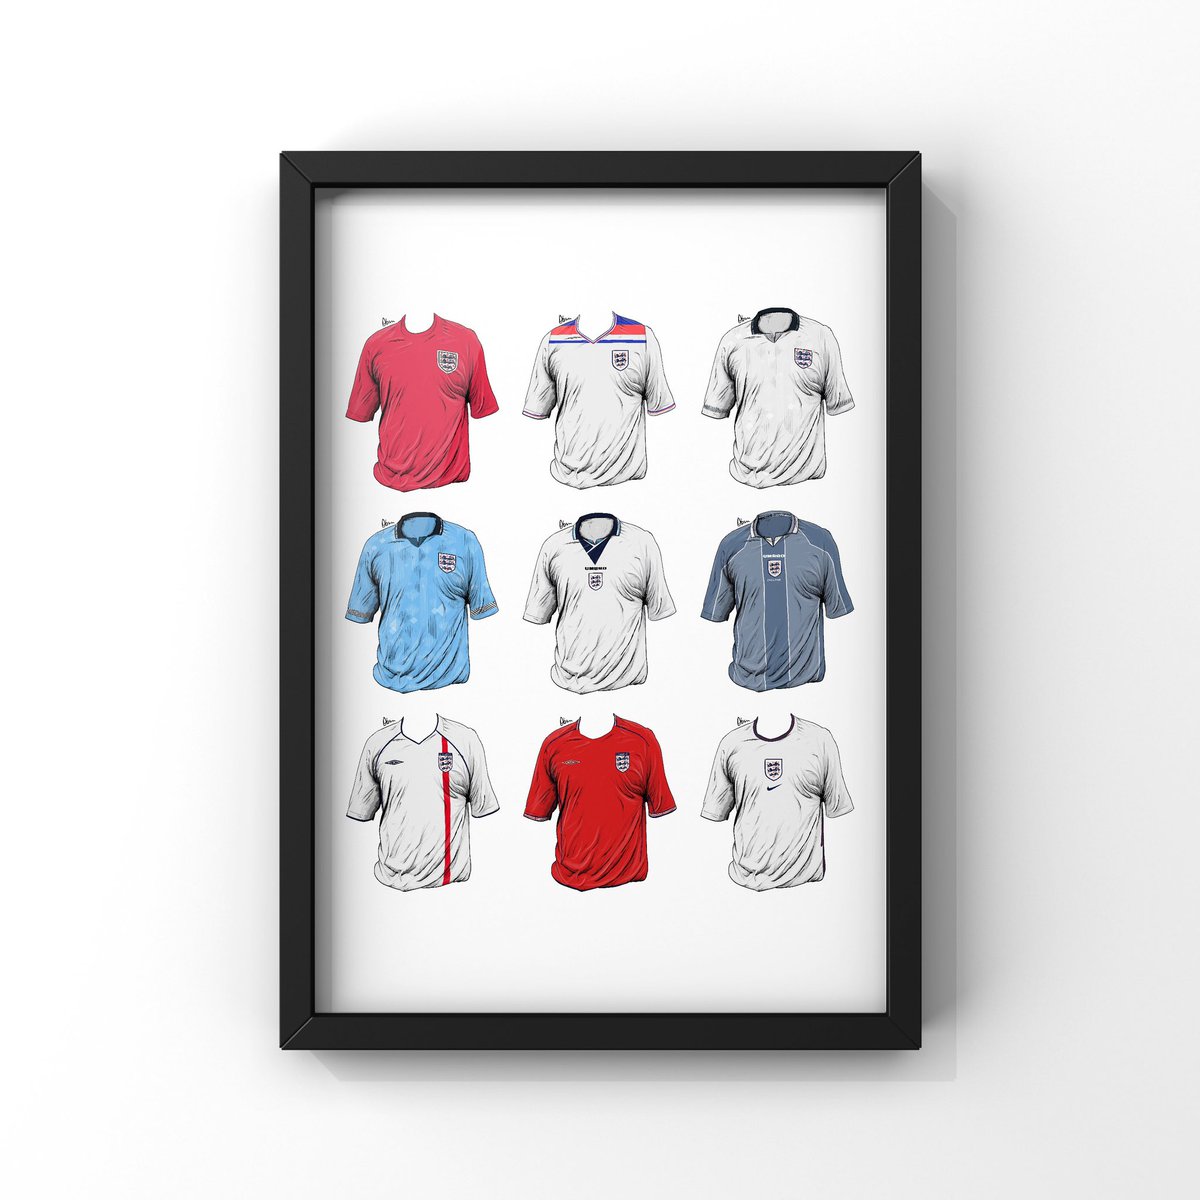 Here is a selection of my framed kits prints. Available from £14.95 on Dbsnstudio.com Lecce FC, Arsenal FC, Celtic coming soon. Comment for your club. #footballartwork #footballart #footballkits #evertonfc #england #englandfootball #mufc #lfc #nufc